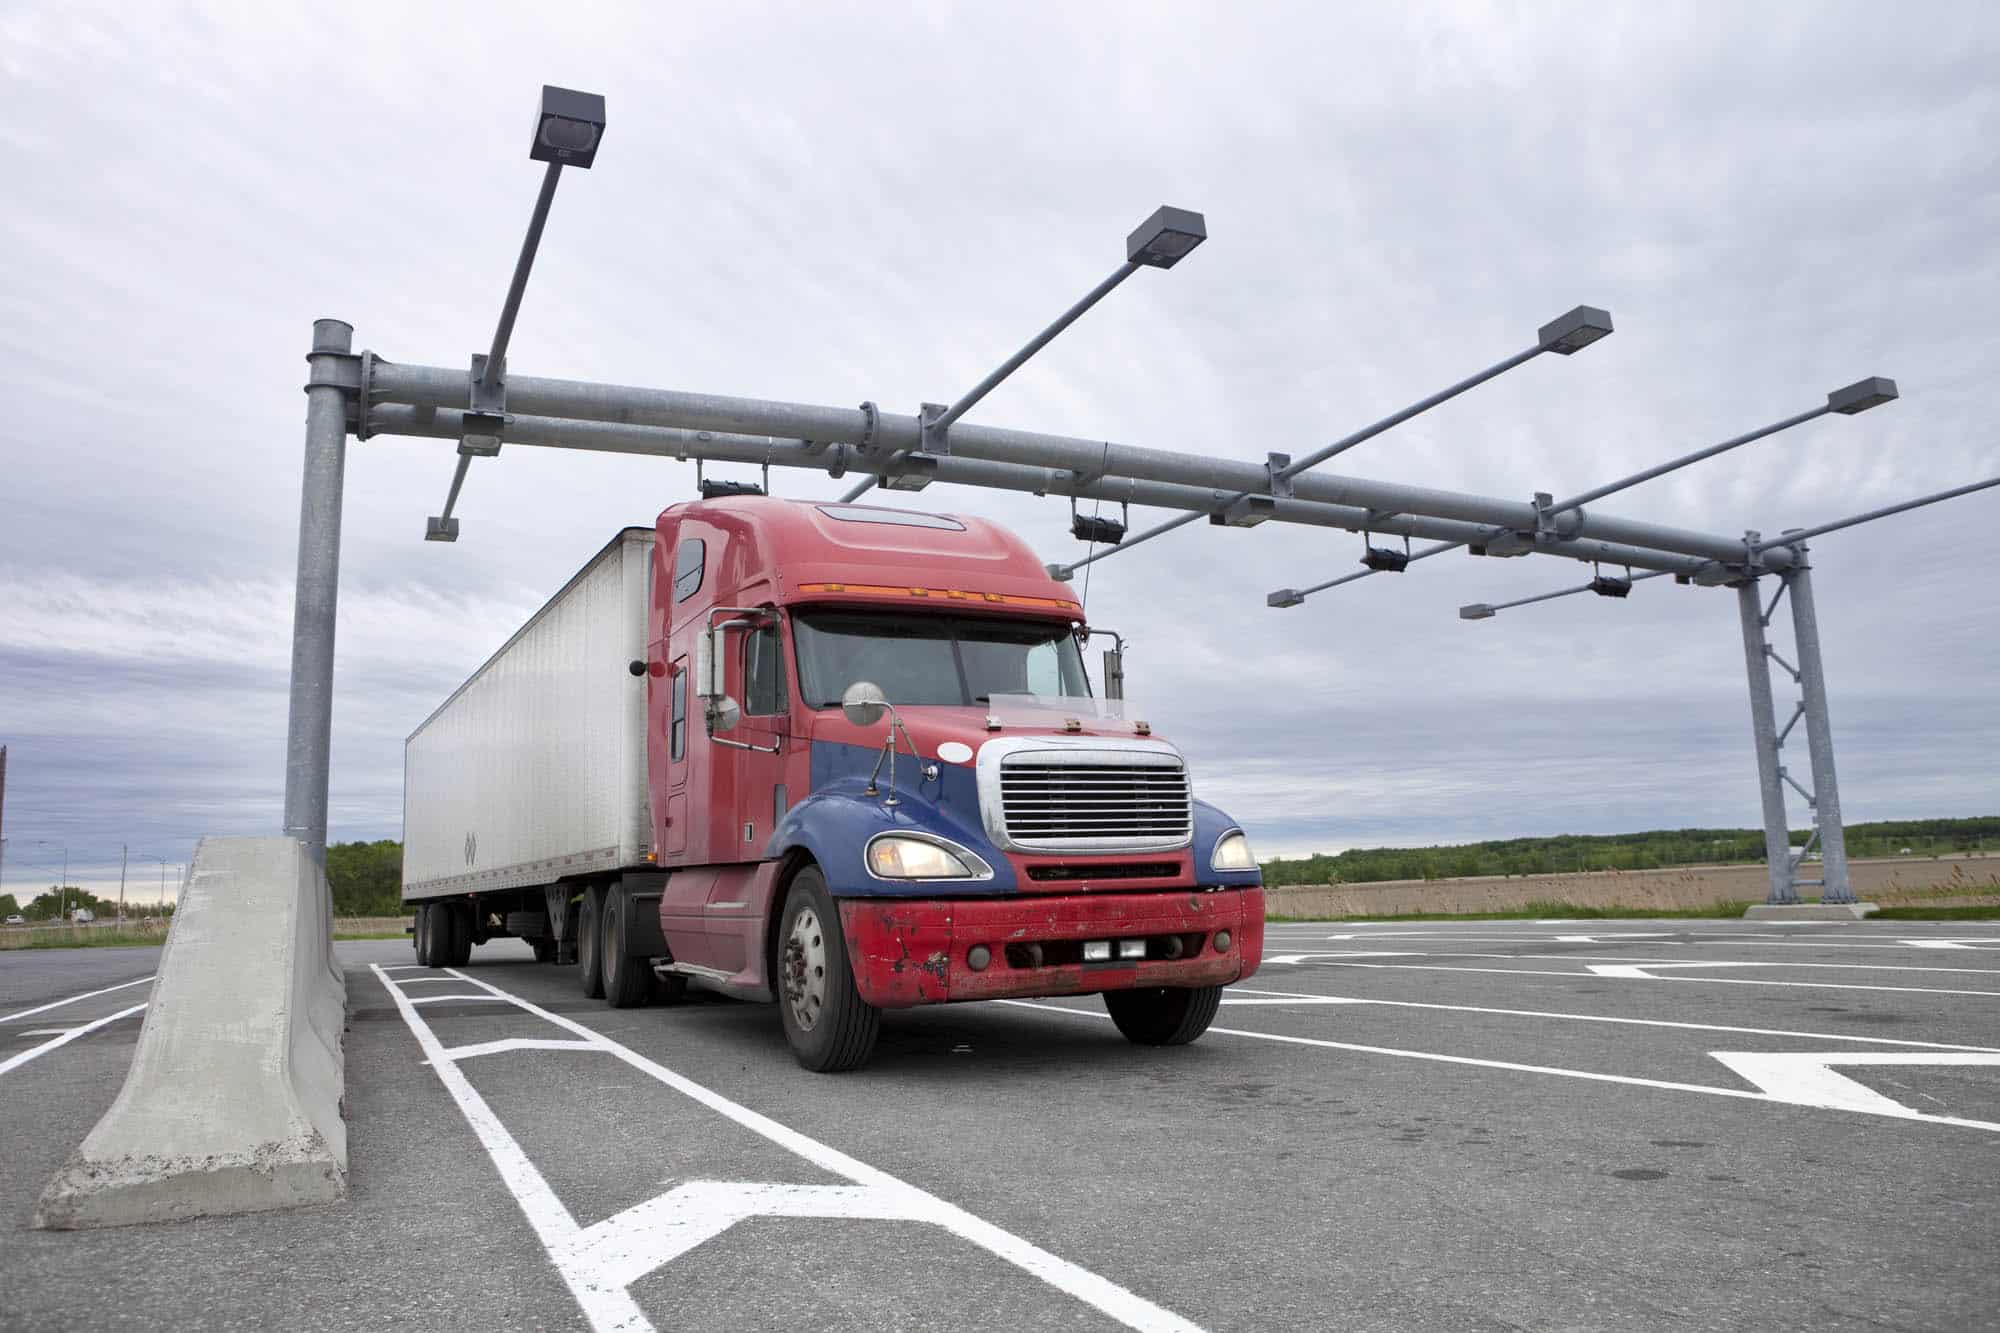 A Mobile Weighbridge can save you thousands of dollars in fines and preventable accidents